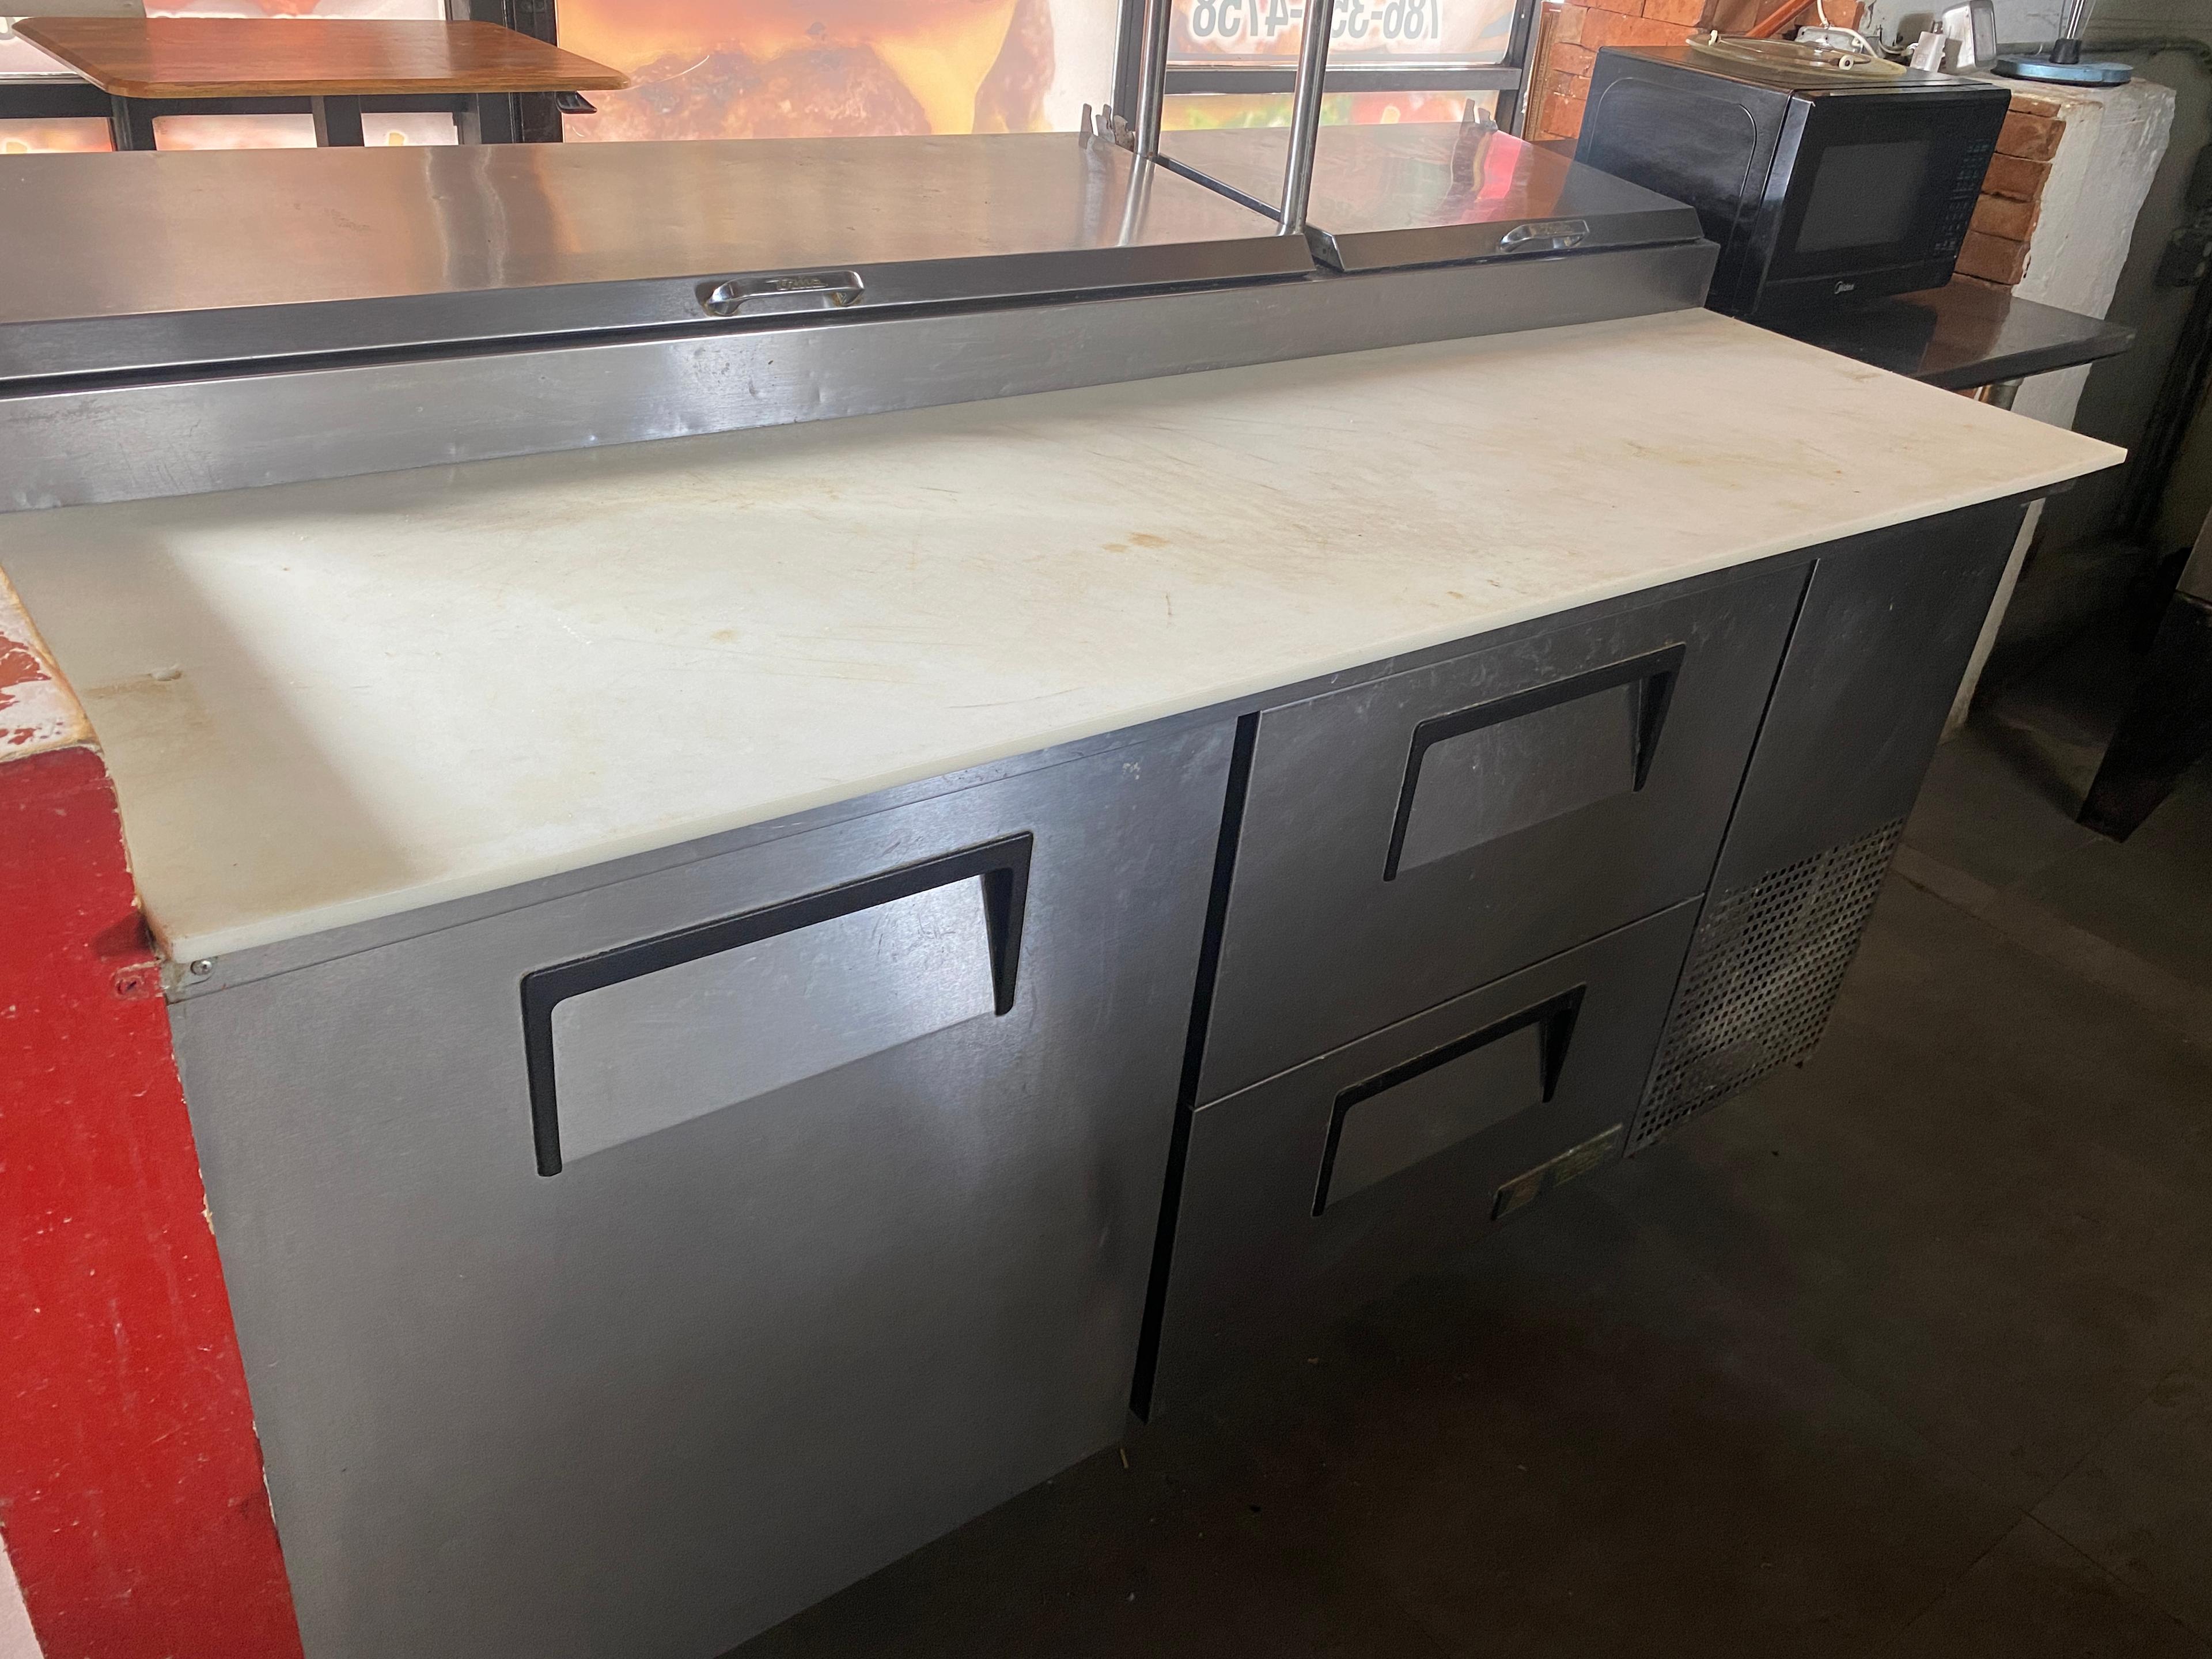 67-inch True refrigerated Pizza prep unit with one door of refrigerated storage and a single epoxy c